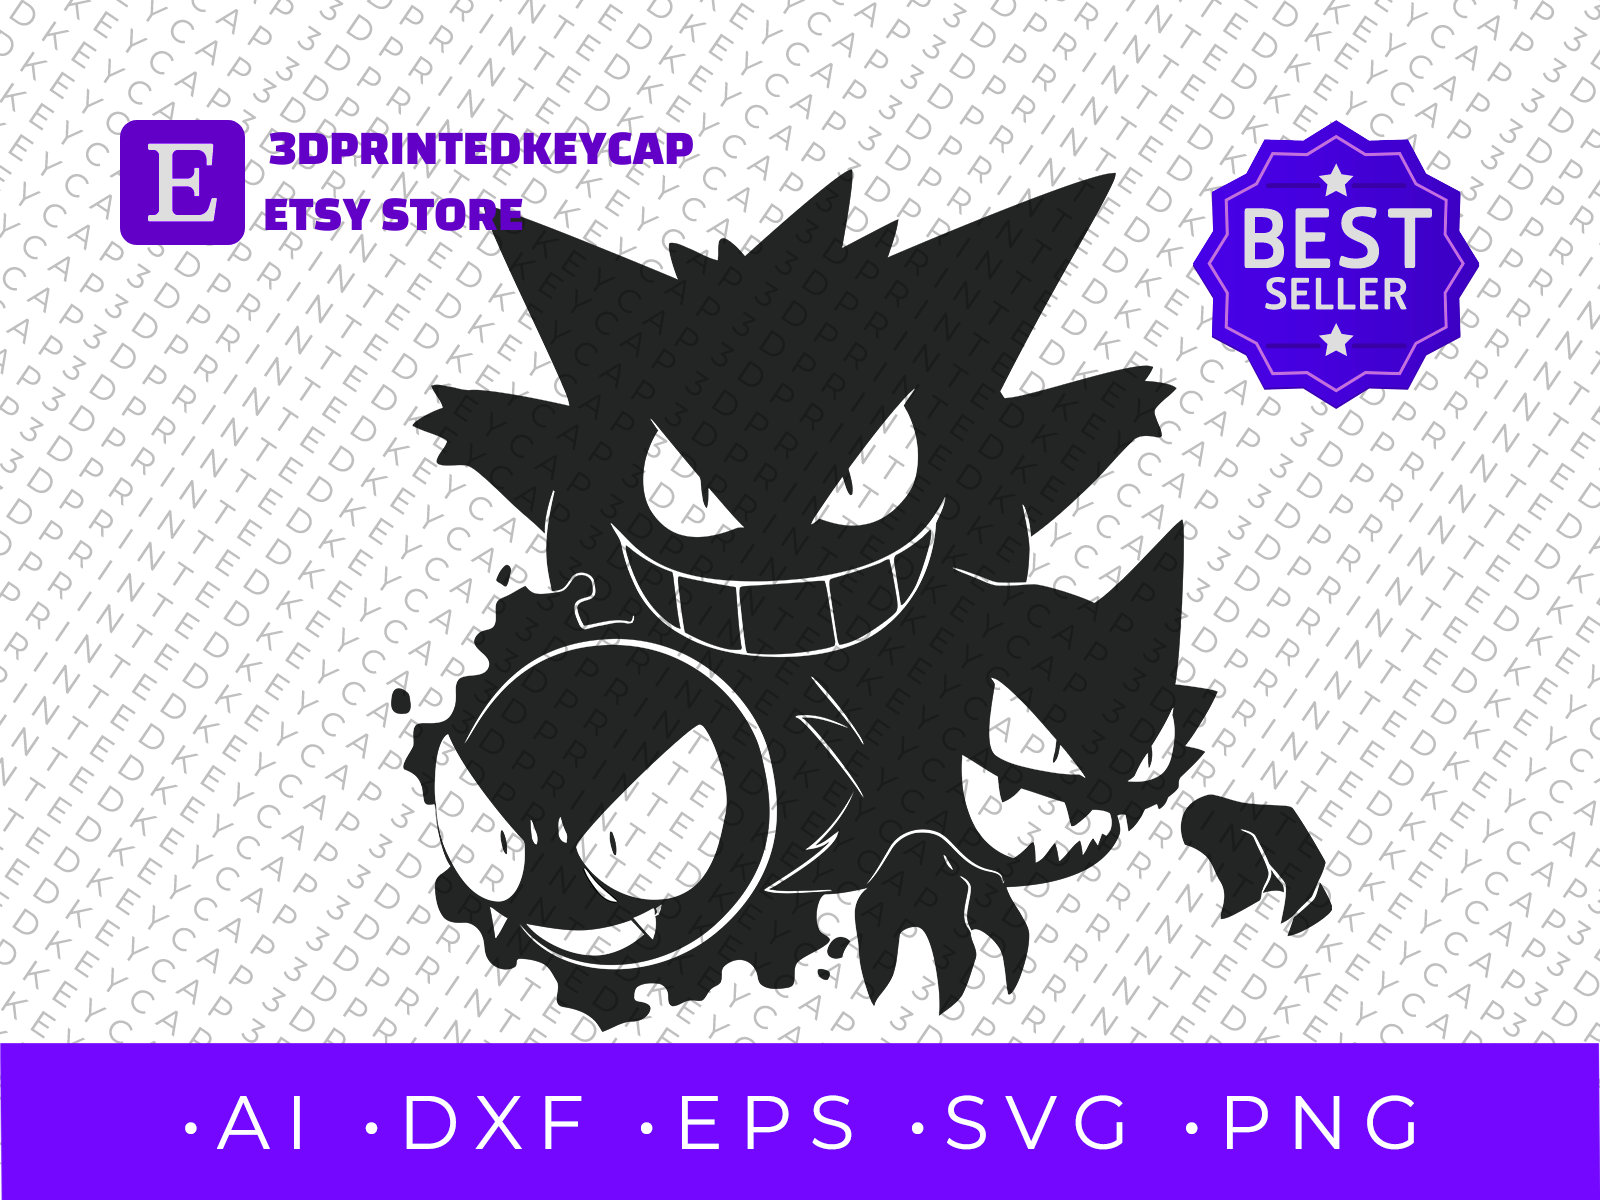 Shiny Gastly, Haunter and Gengar 3D assets discovered in app's